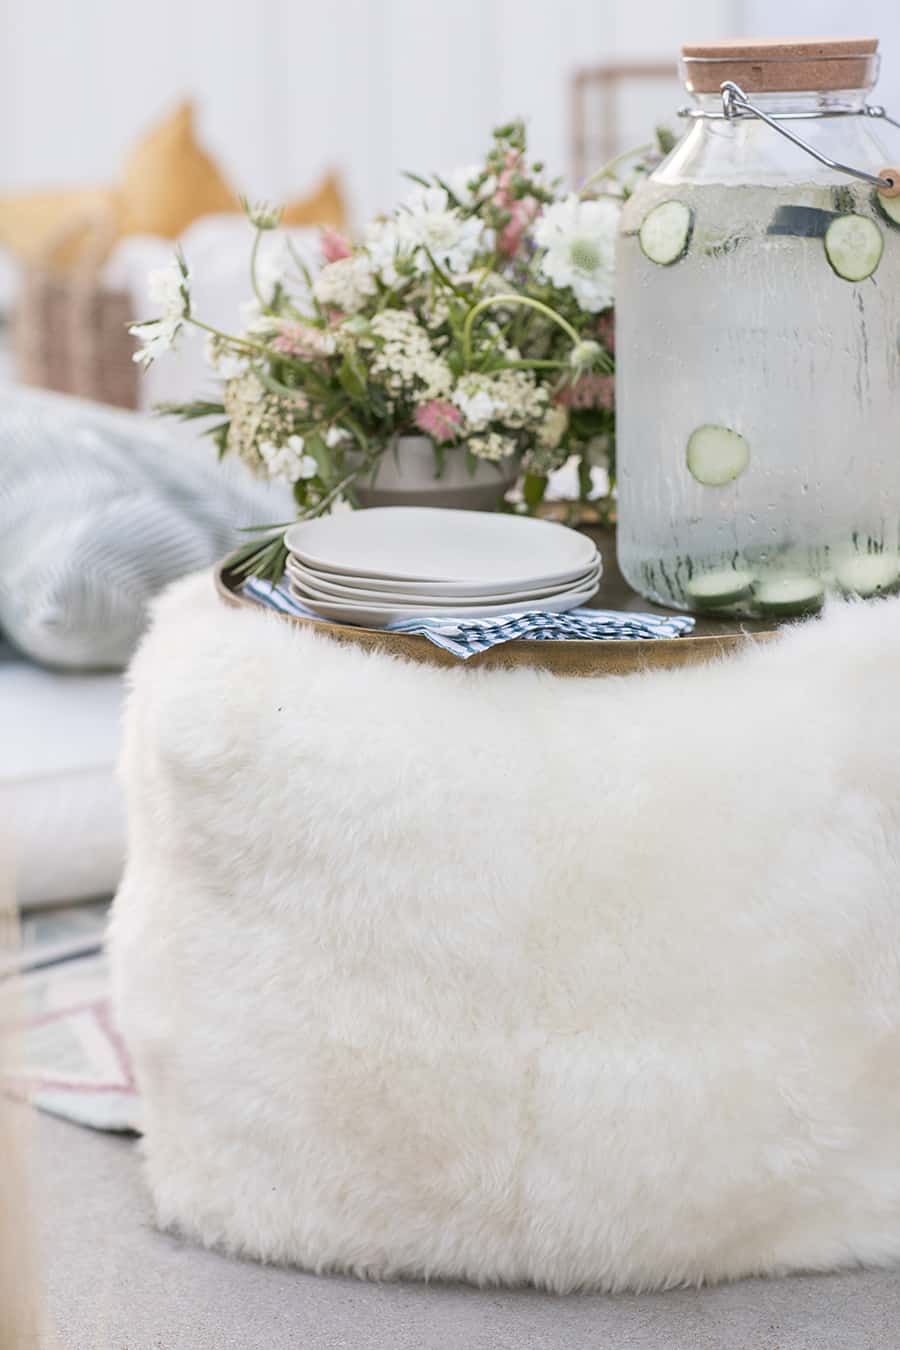 White pillow pouf with gold tray and plates and water.